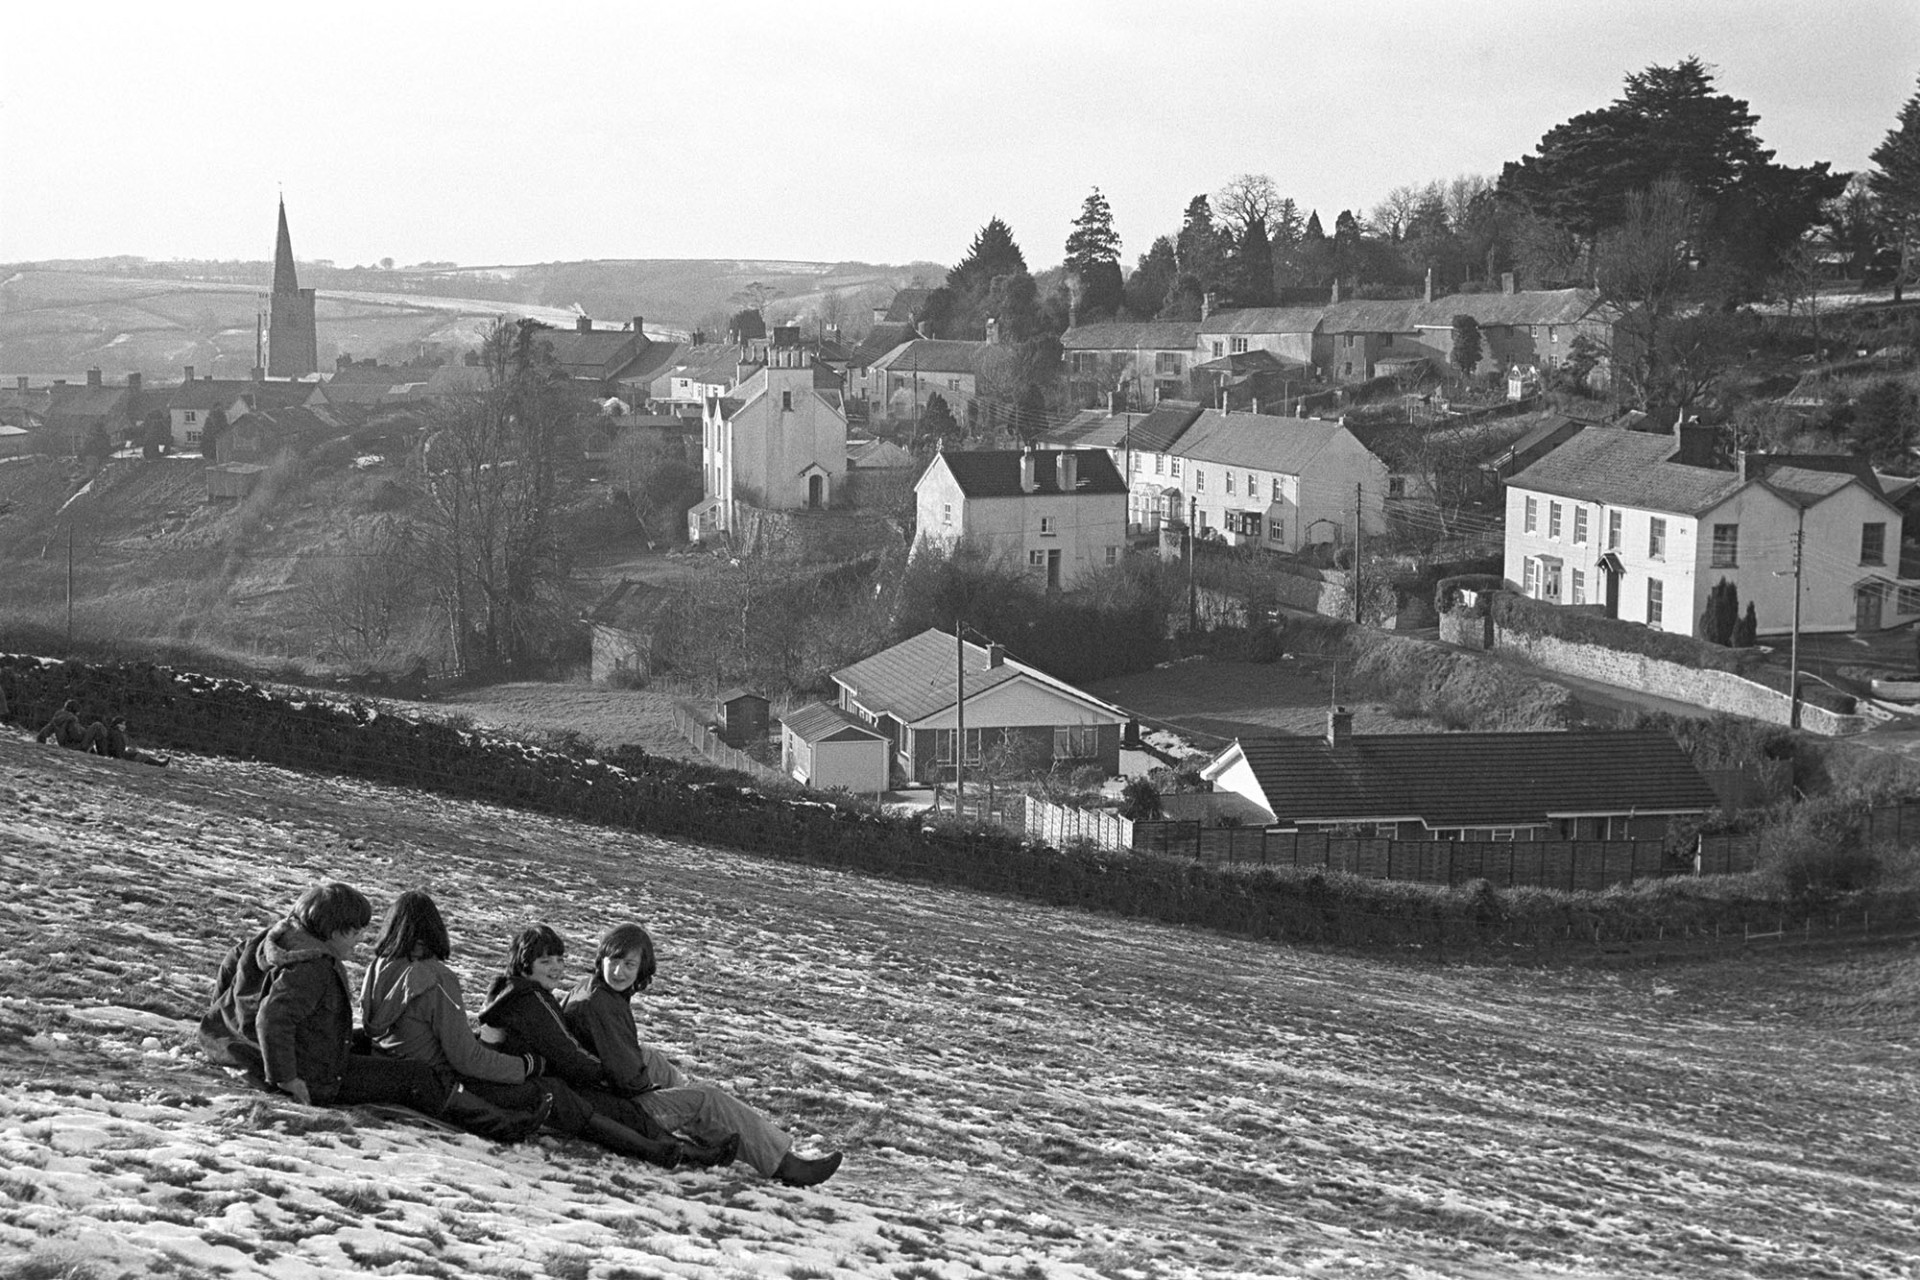 Children tobogganing in front of town, snow.
[Four children tobogganing down a field at Hatherleigh. The town and church tower are visible in the background.]